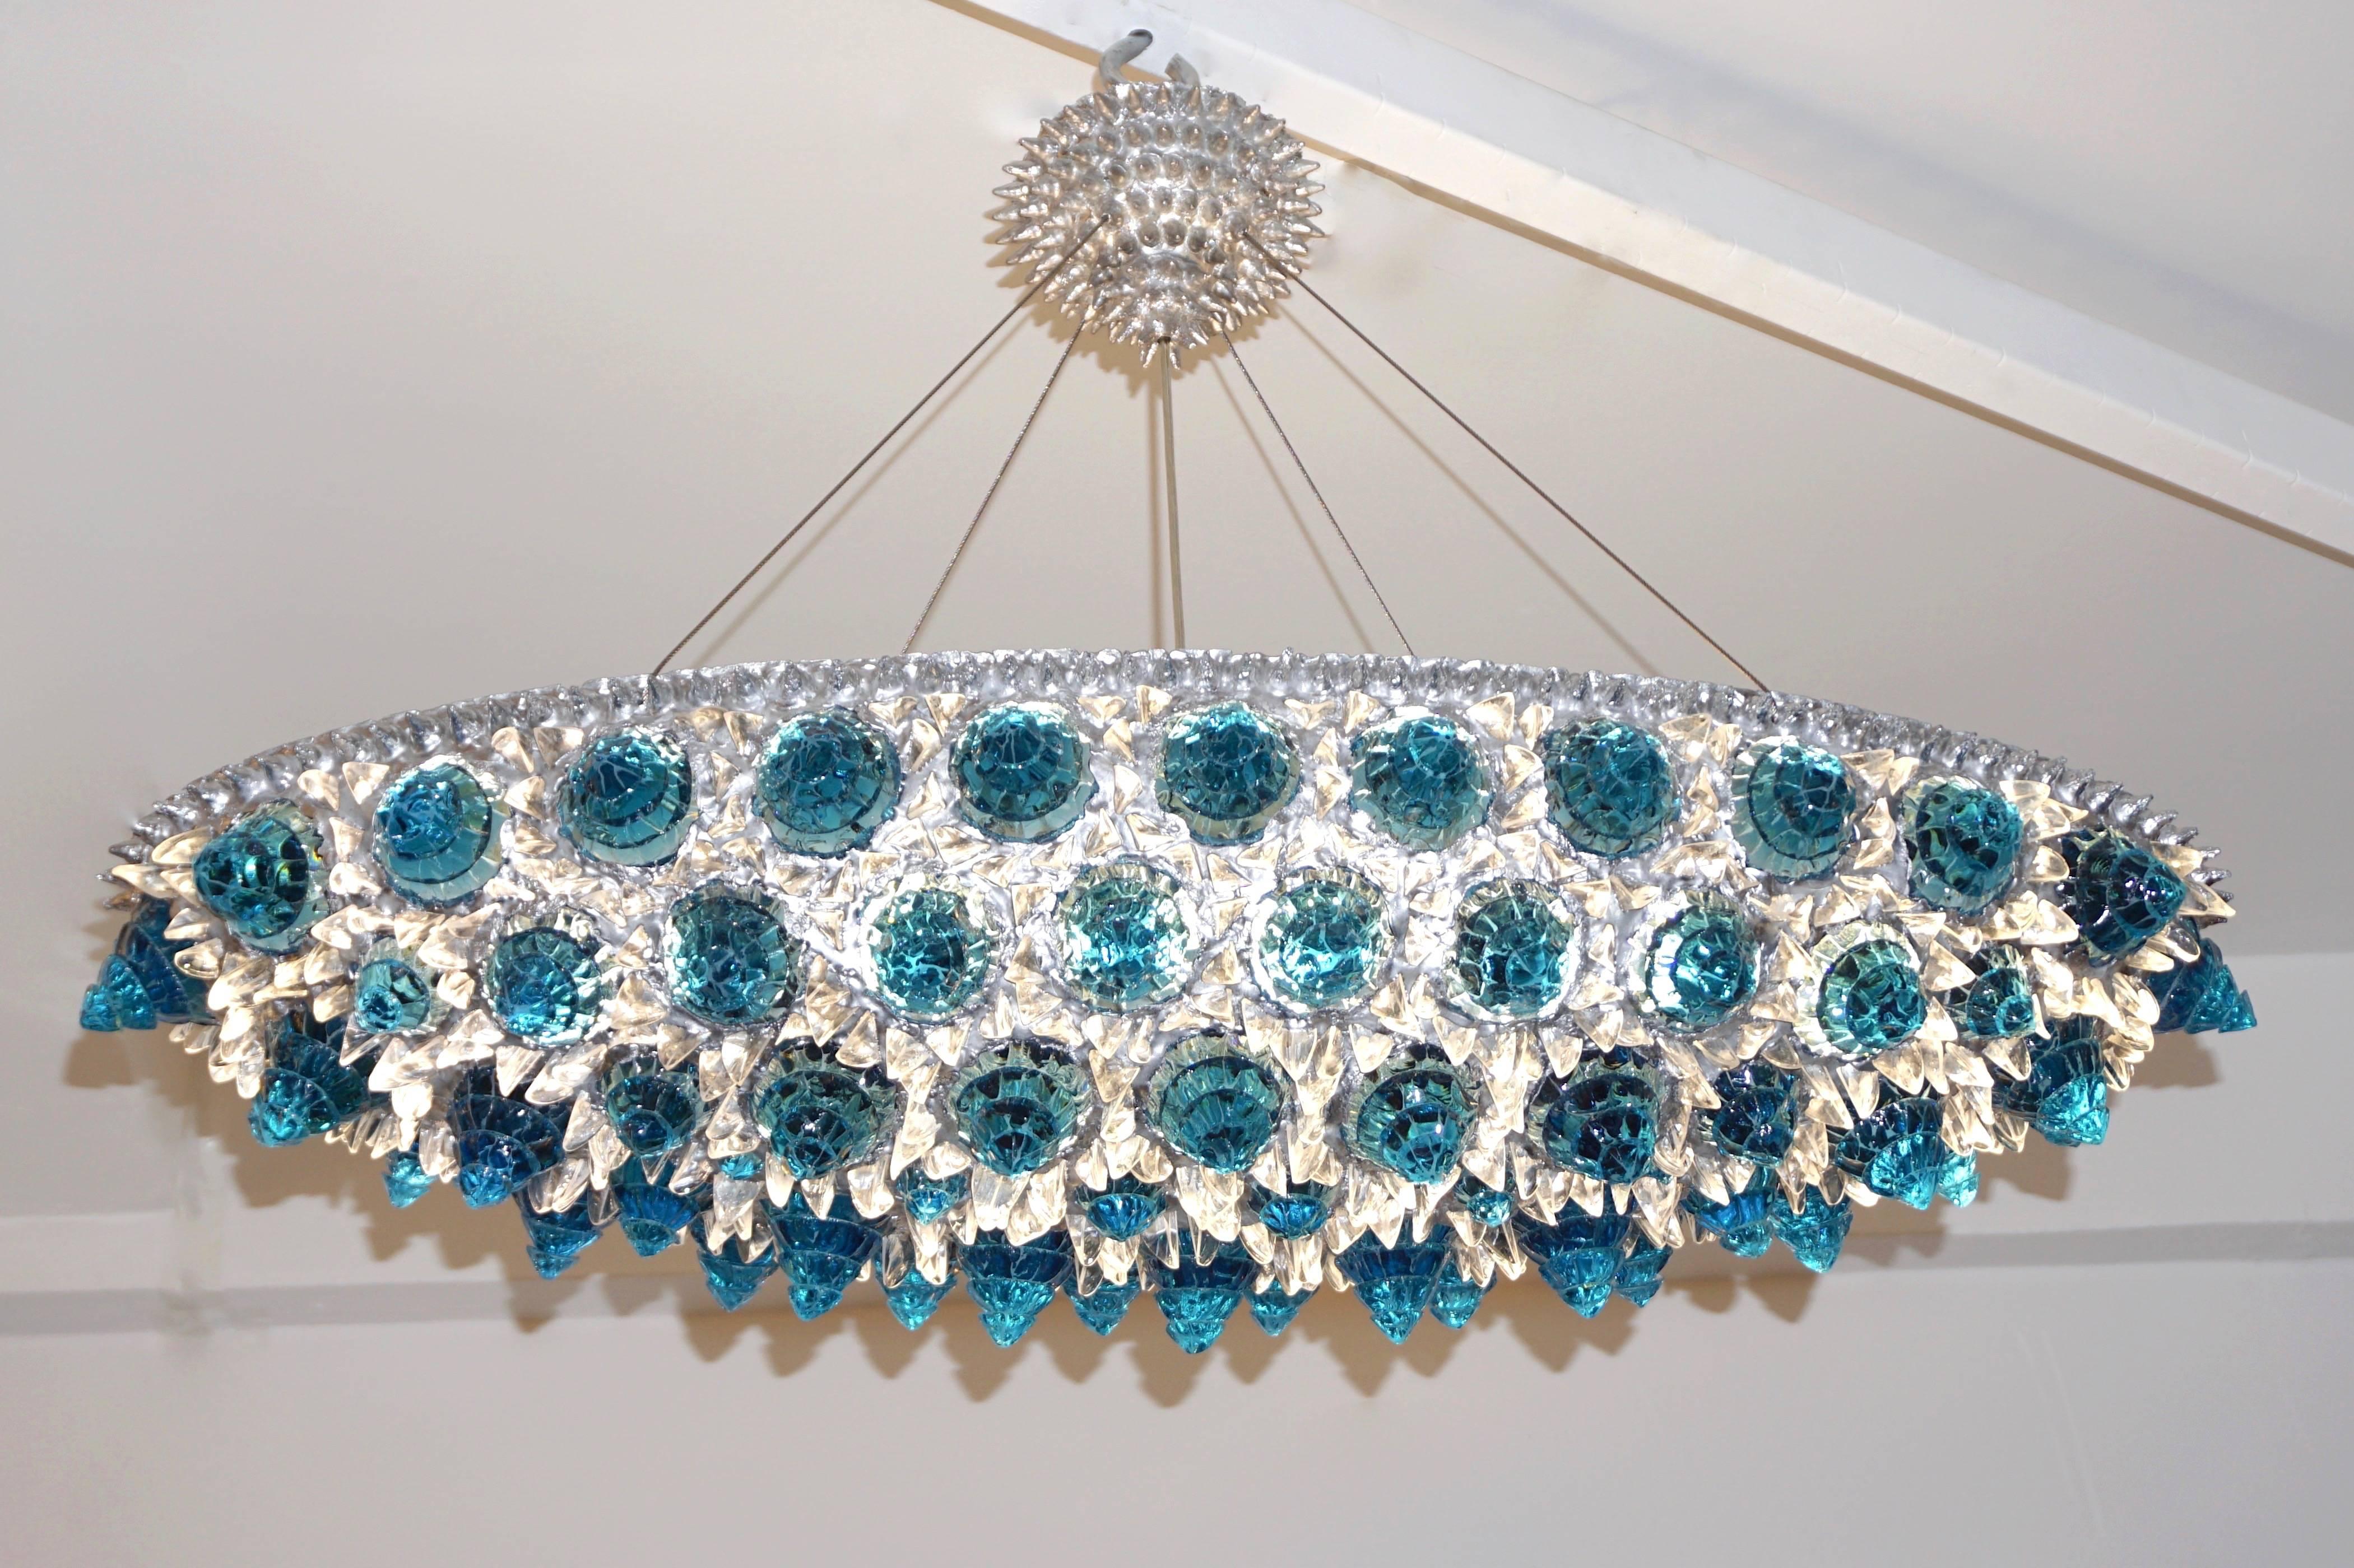 A jewel like Italian oval pendant or flush mount chandelier, Work of Art sculpture, entirely handcrafted, the sophisticated organic decoration is composed of hand-cut rock glass diamond elements of different sizes set in a hand-cast iron frame